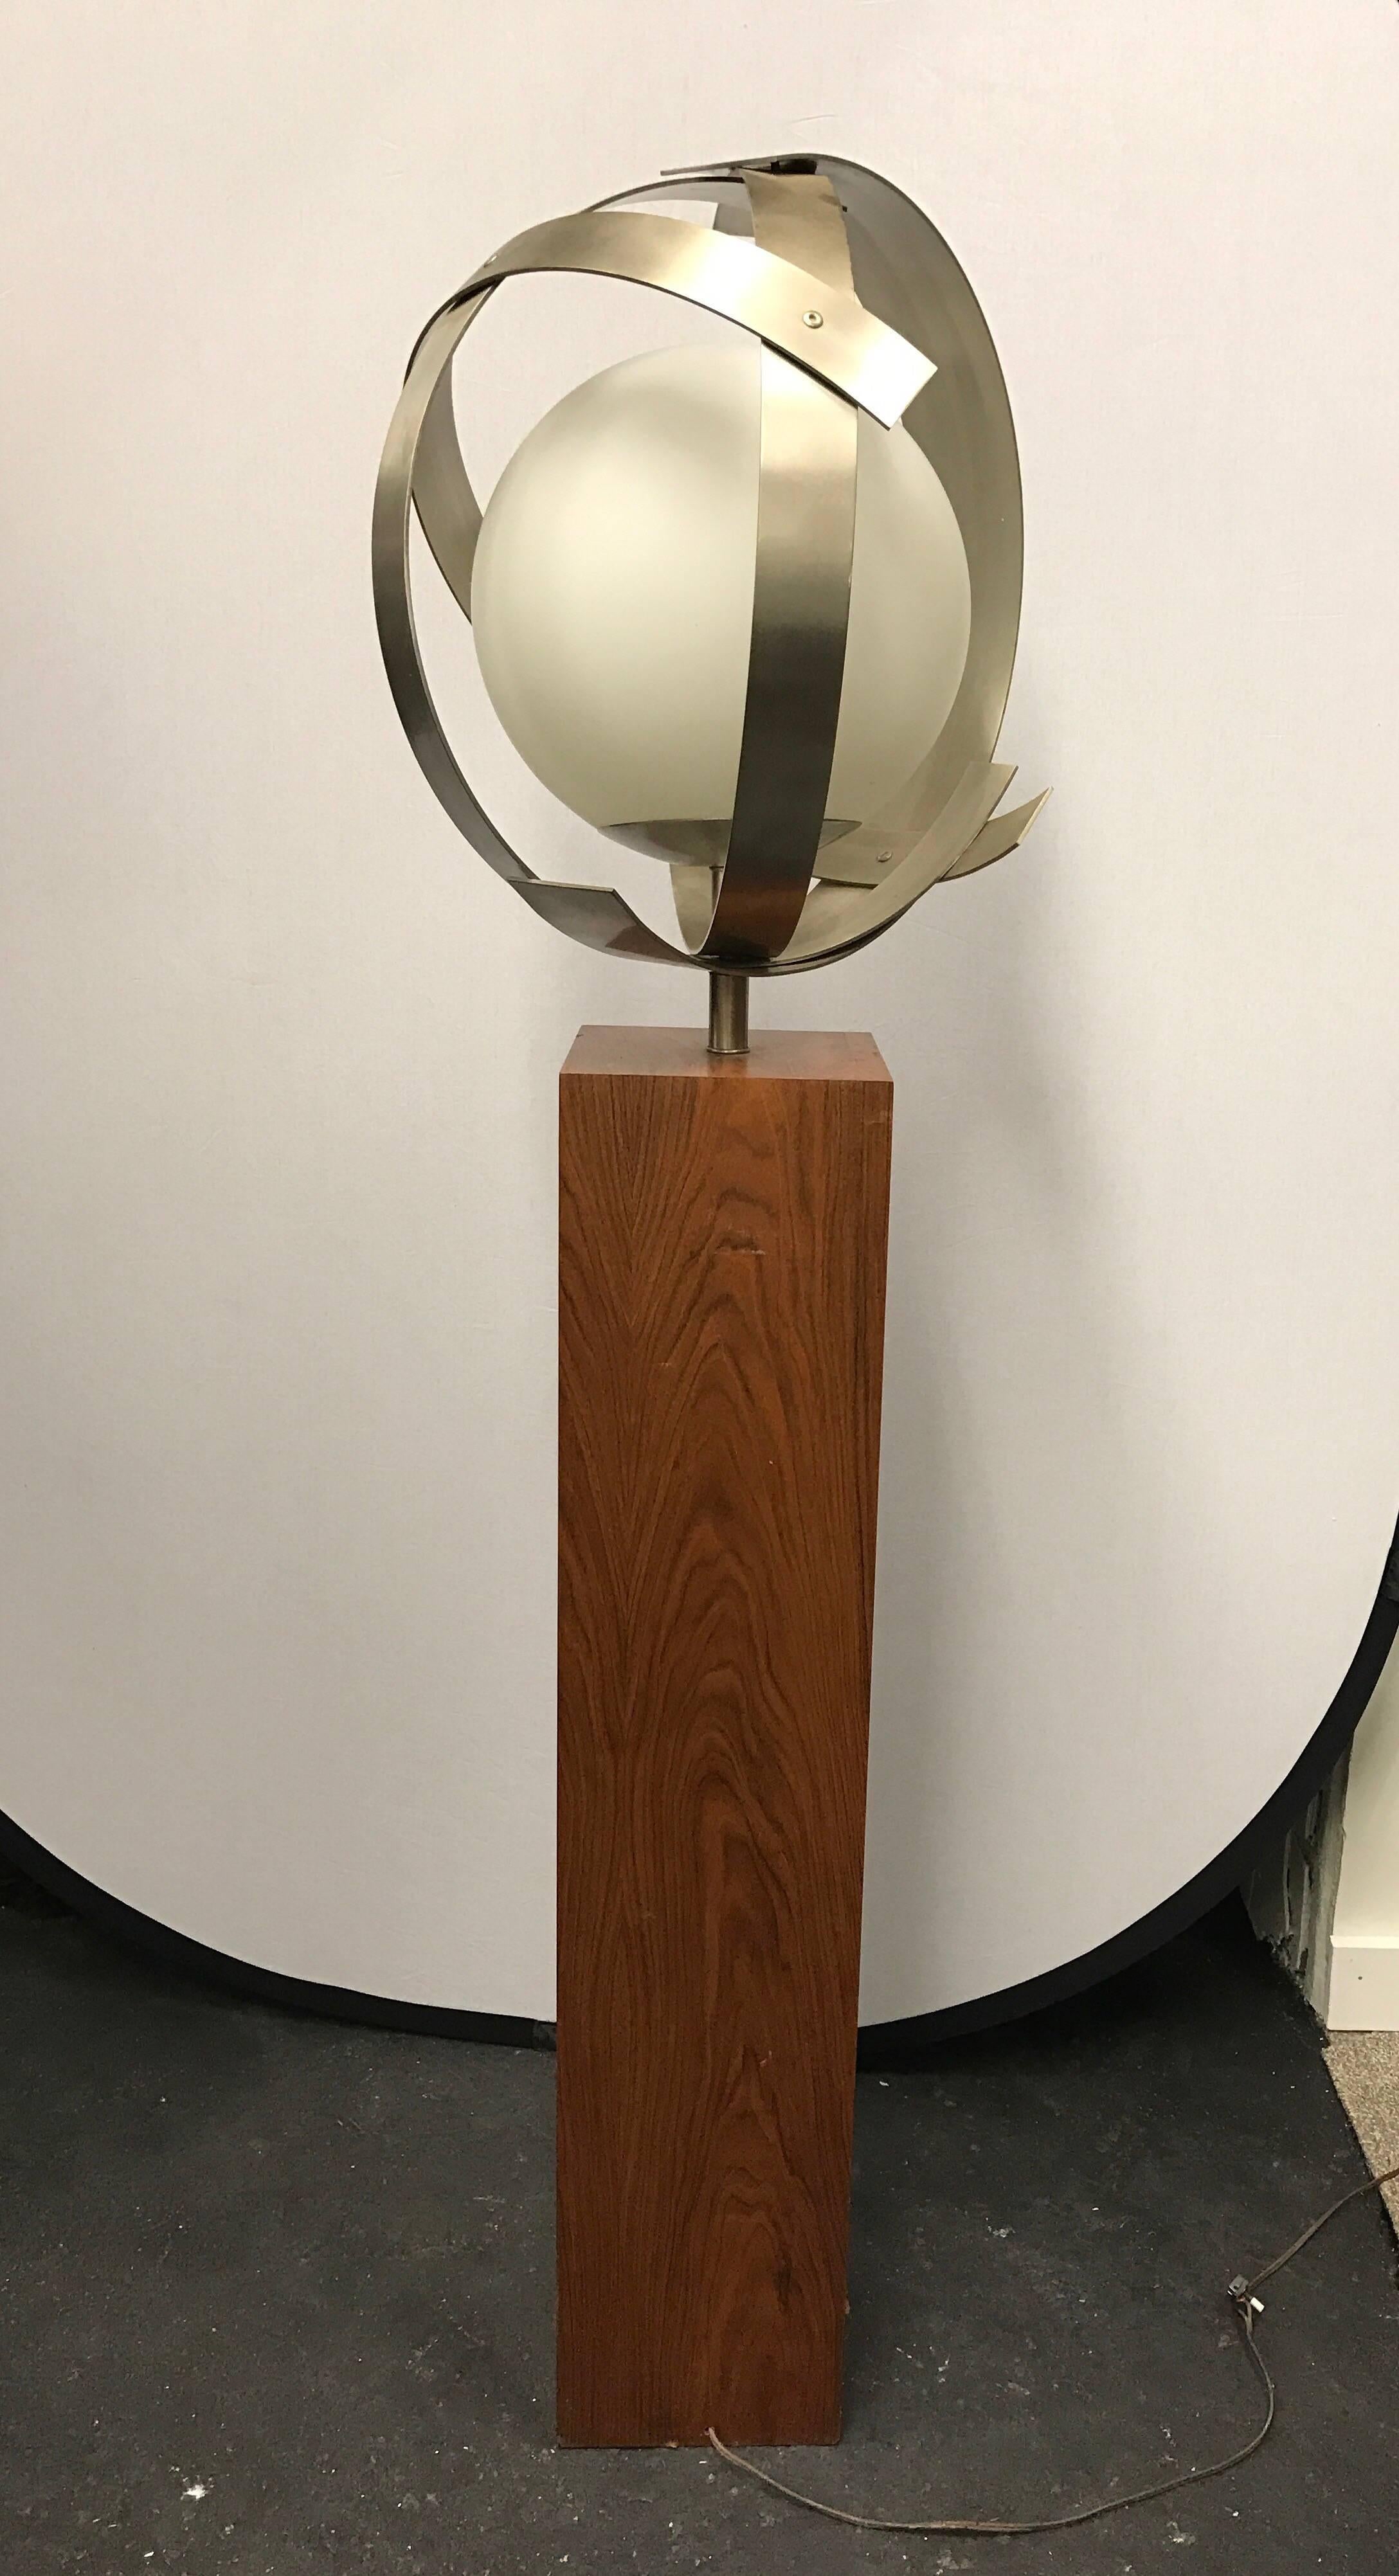 Midcentury globe lamp inside a silver metal sculpture and mounted on a wood base. Made in Italy.